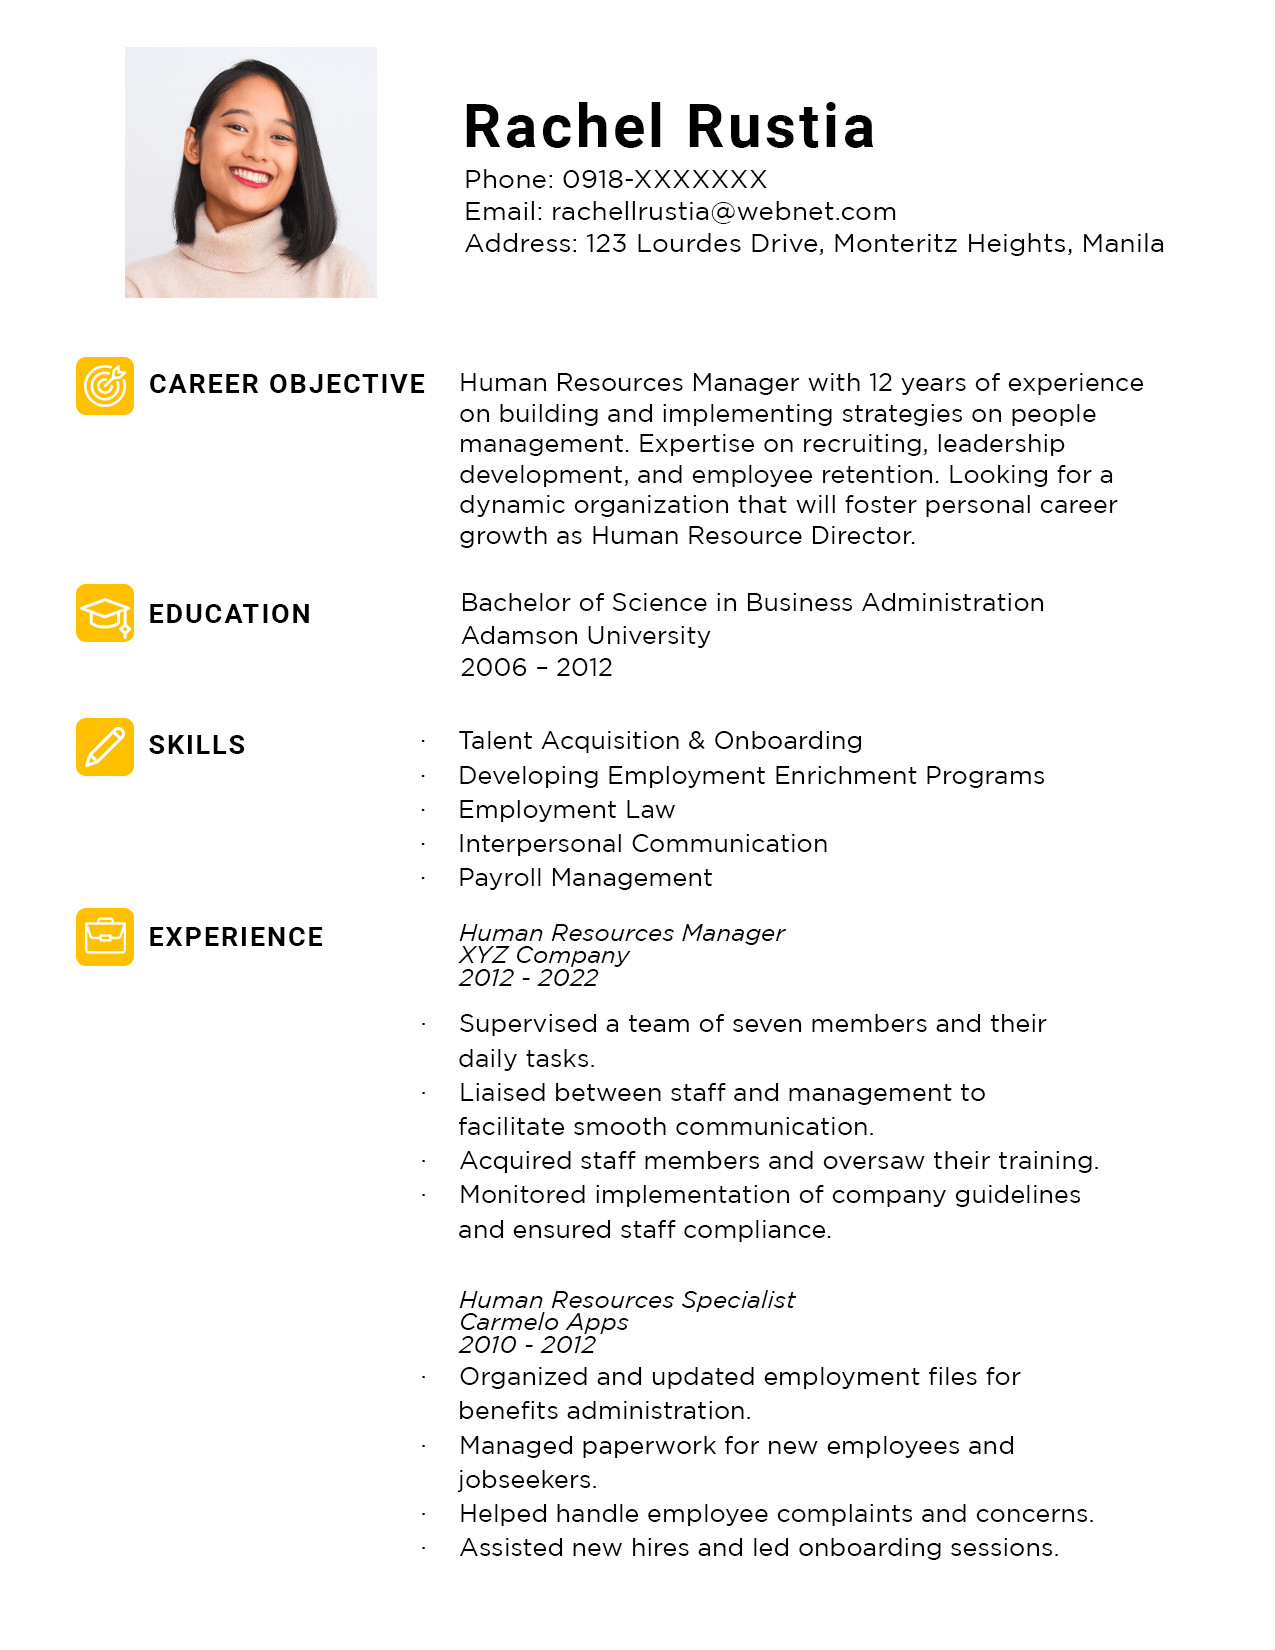 Sample Resume with No Work Experience College Student Philippines Resume Templates You Can Download for Free!